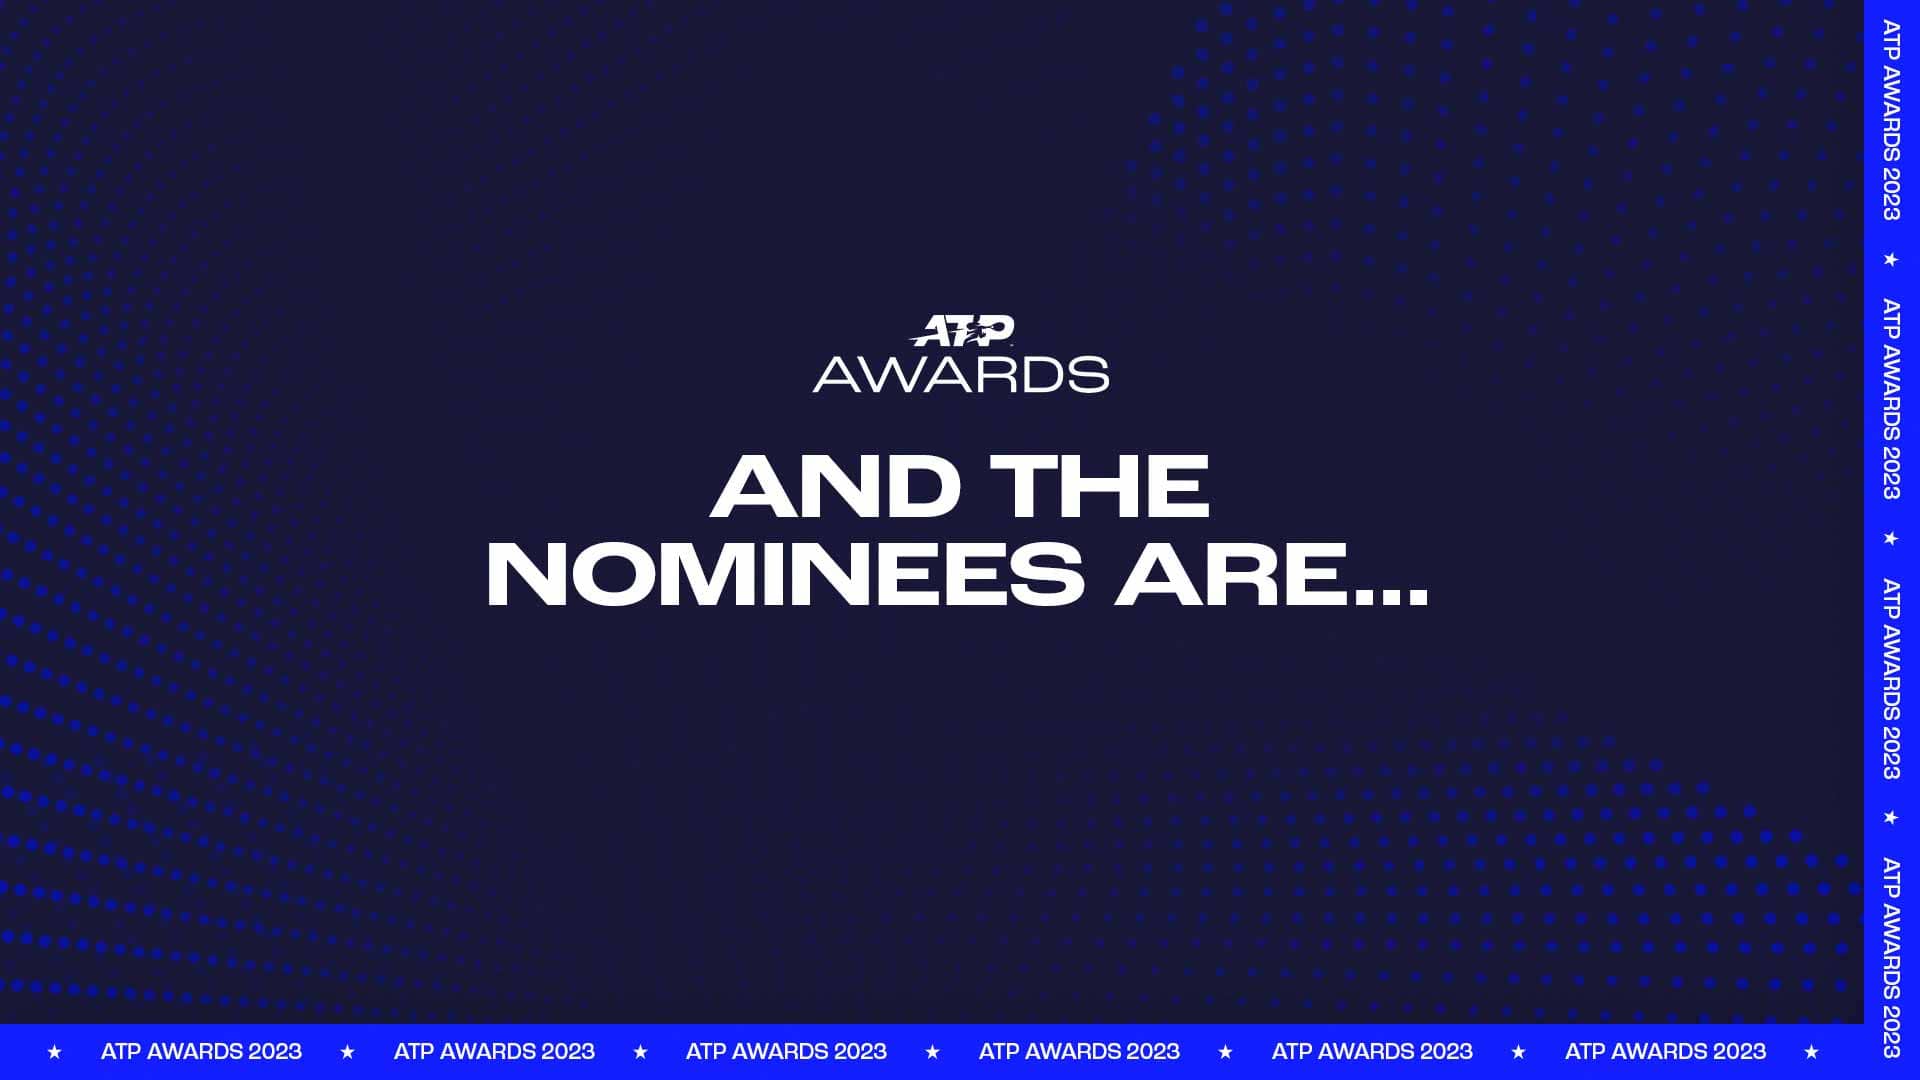 And The Nominees Are... | 2023 ATP Awards